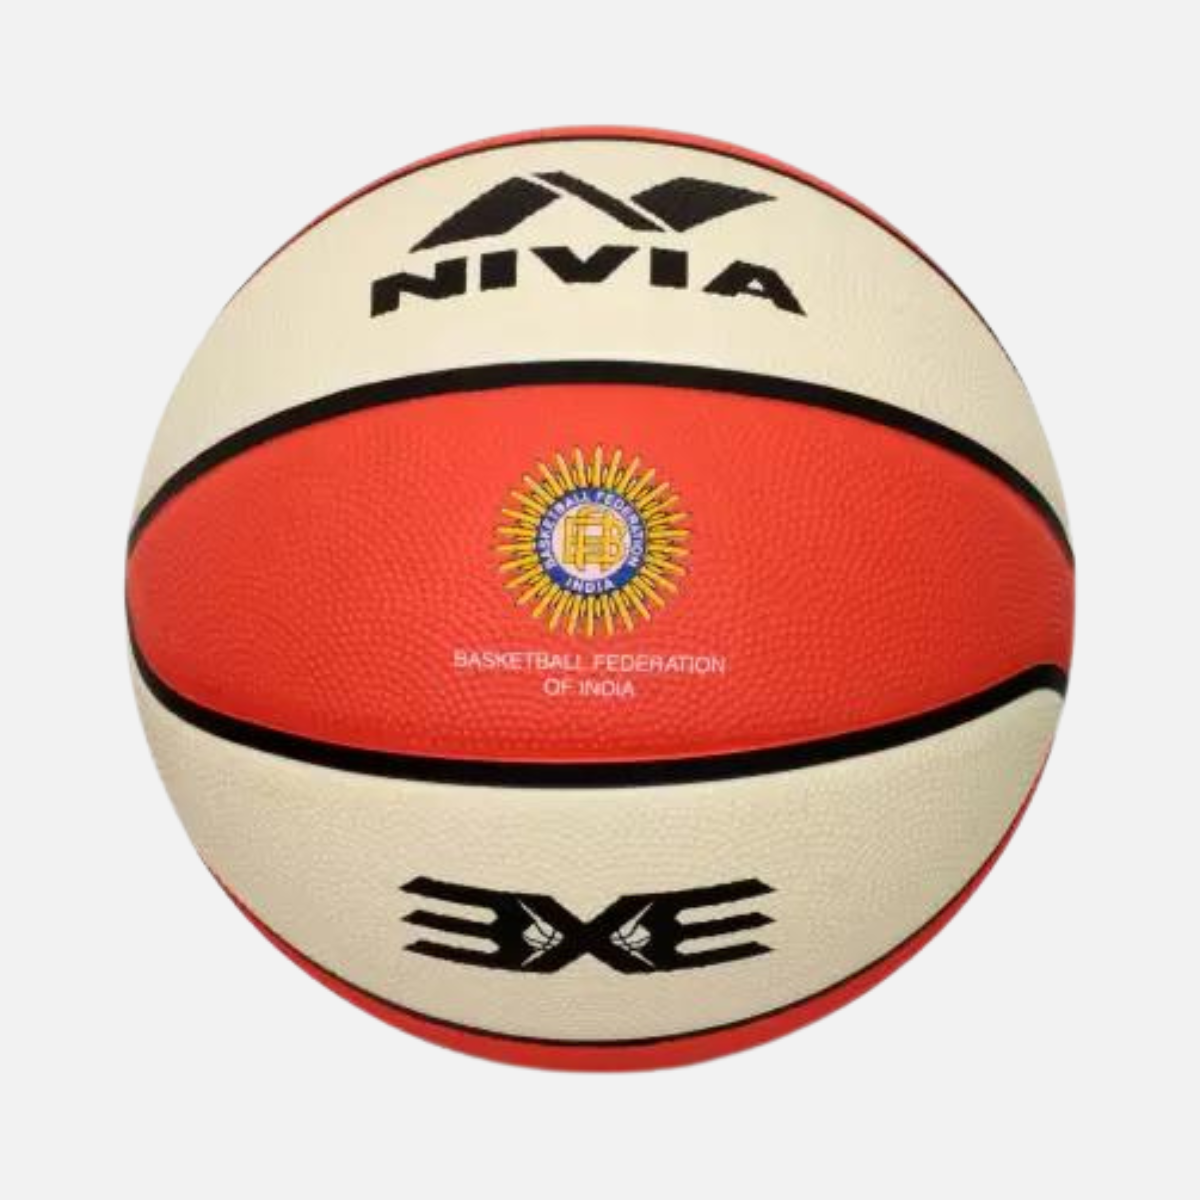 Nivia 3x3 Moulded Basketball -Green-Blue/Red-Cream